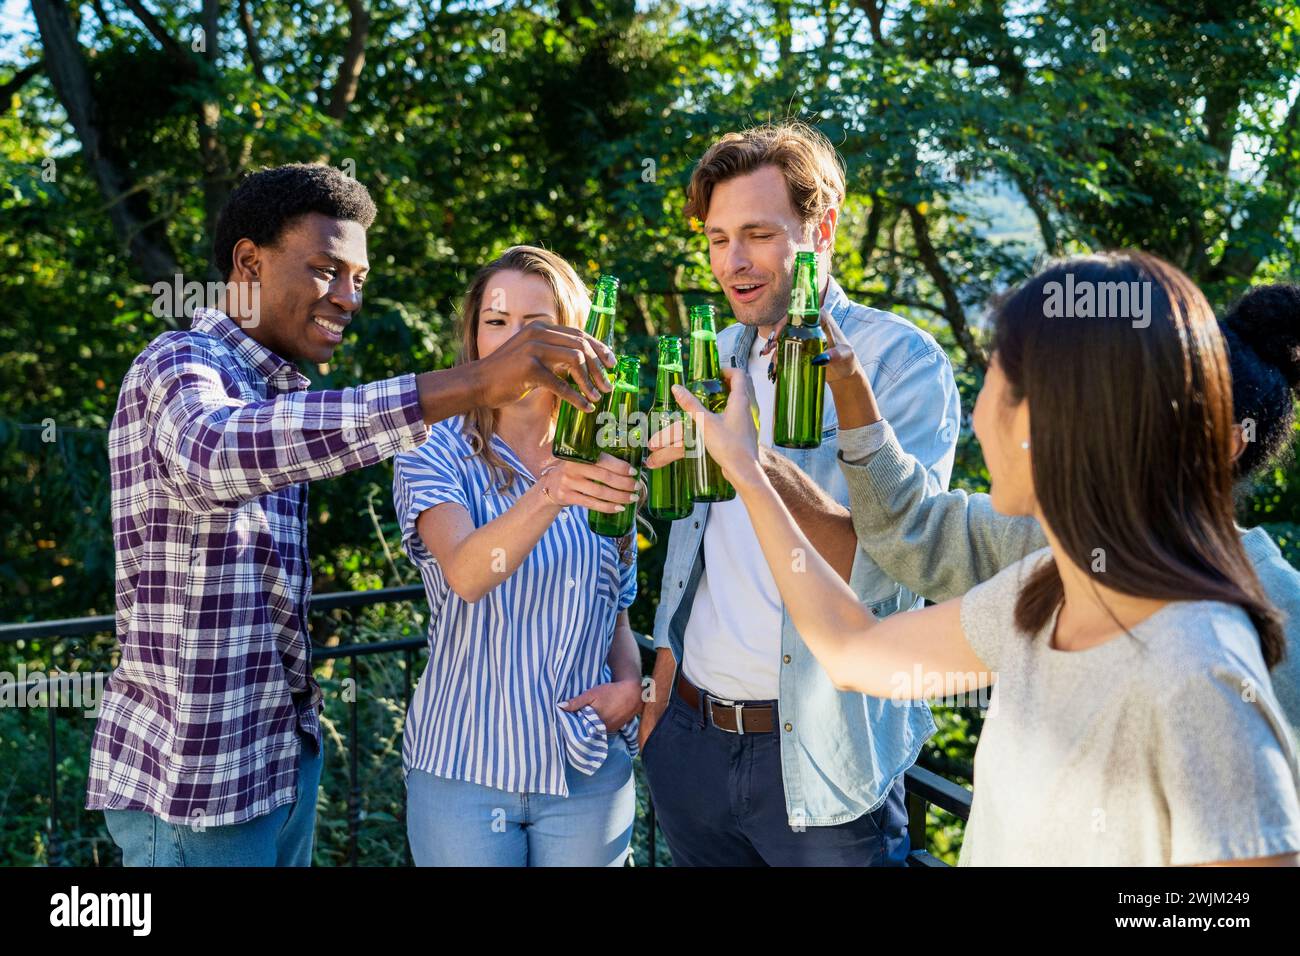 Group of friends toasting with beer bottles standing outdoors Stock Photo